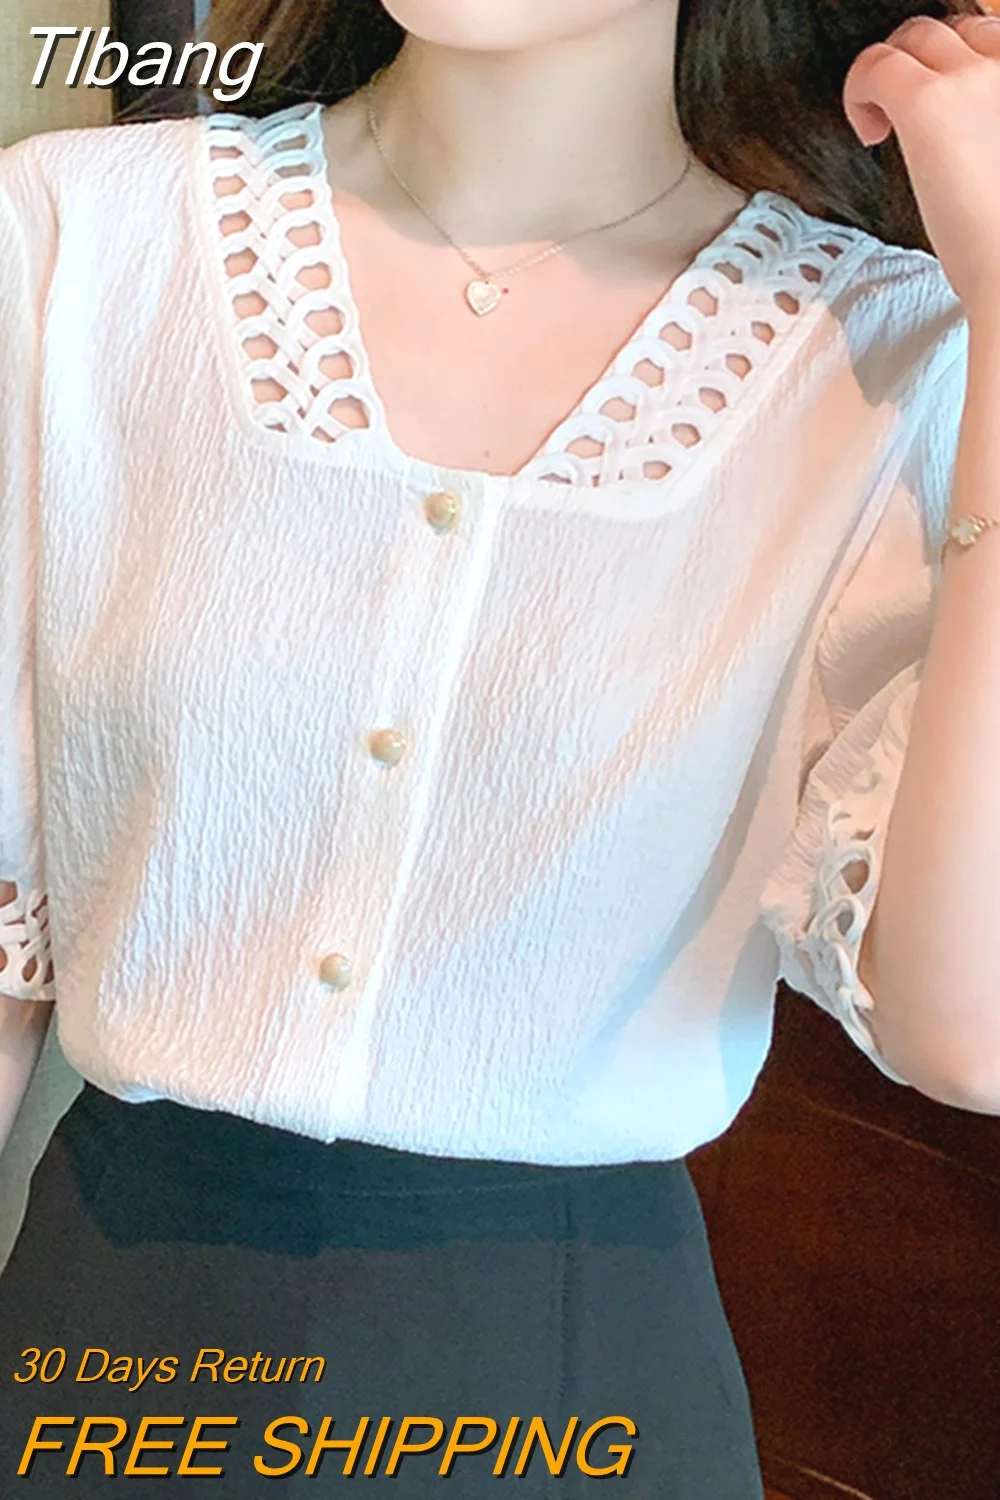 Tlbang Shirts V Neck Fashion Hollow Out Chiffon Women Blouse and Tops New Office Lady Short Sleeve White Clothing Blusas 20231